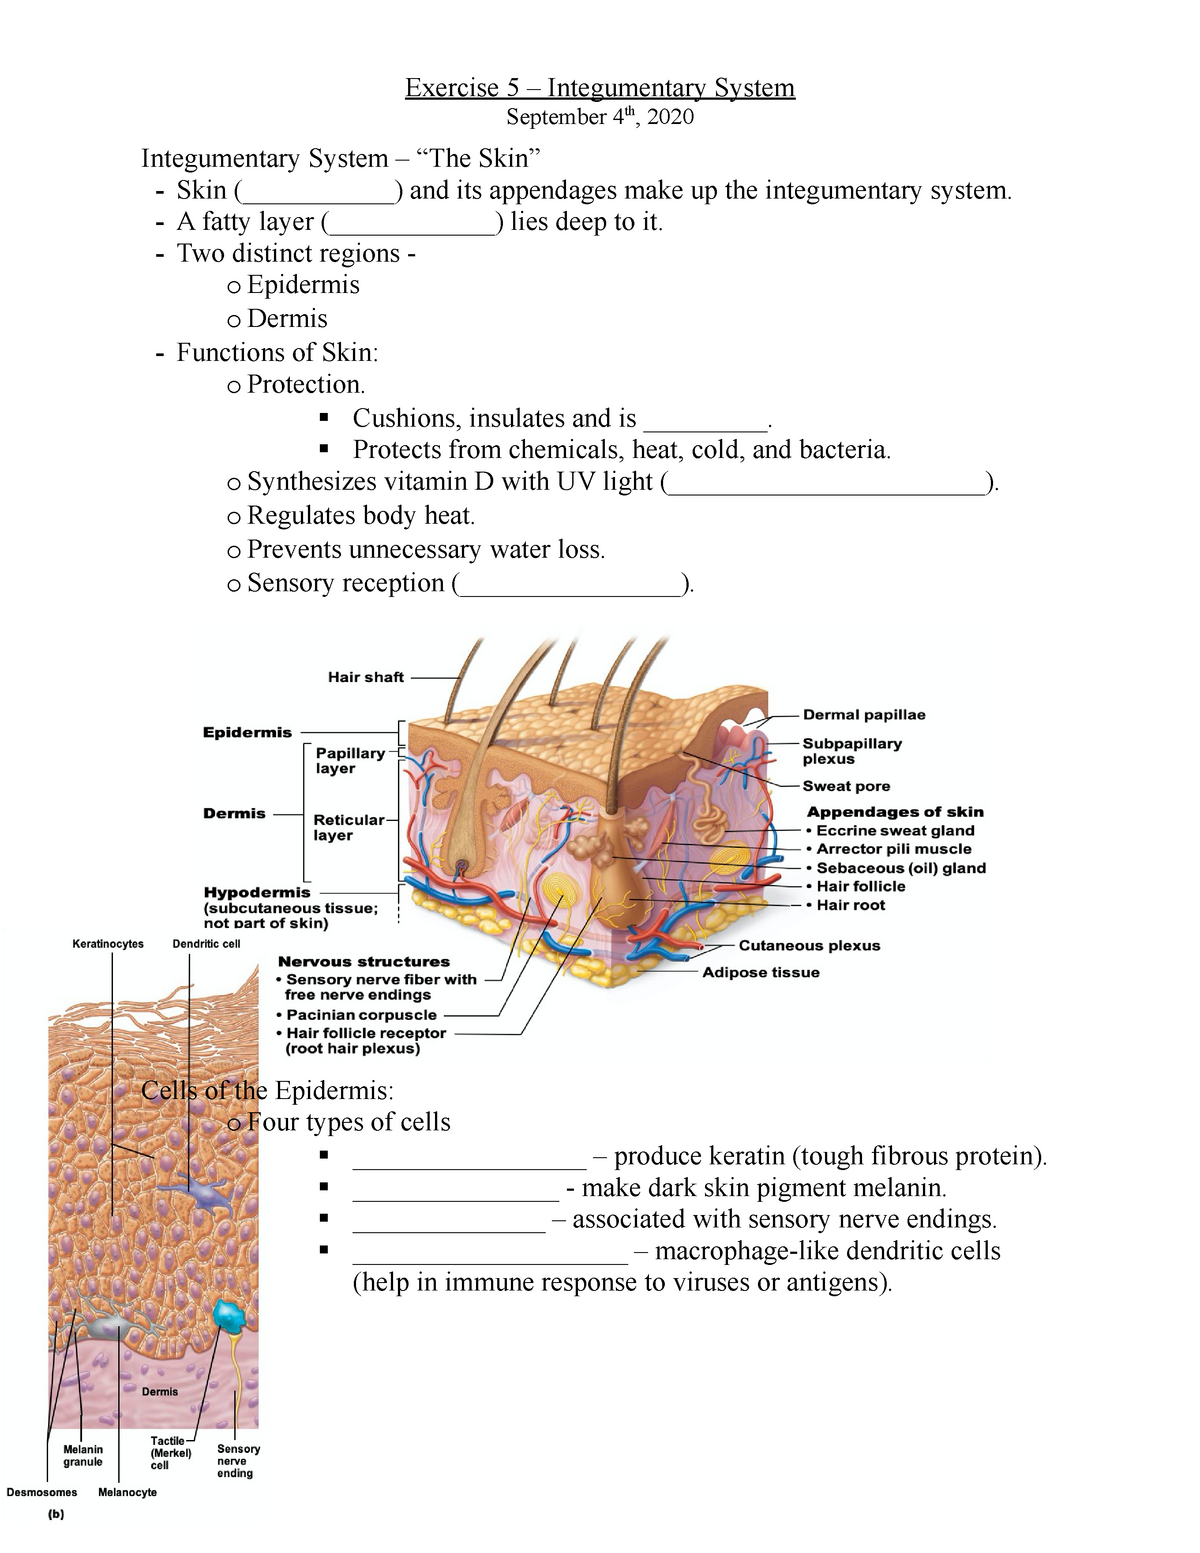 Exercise 20 - Integumentary System Outline - BIO-20-20 - Anatomy Throughout Integumentary System Worksheet Answers